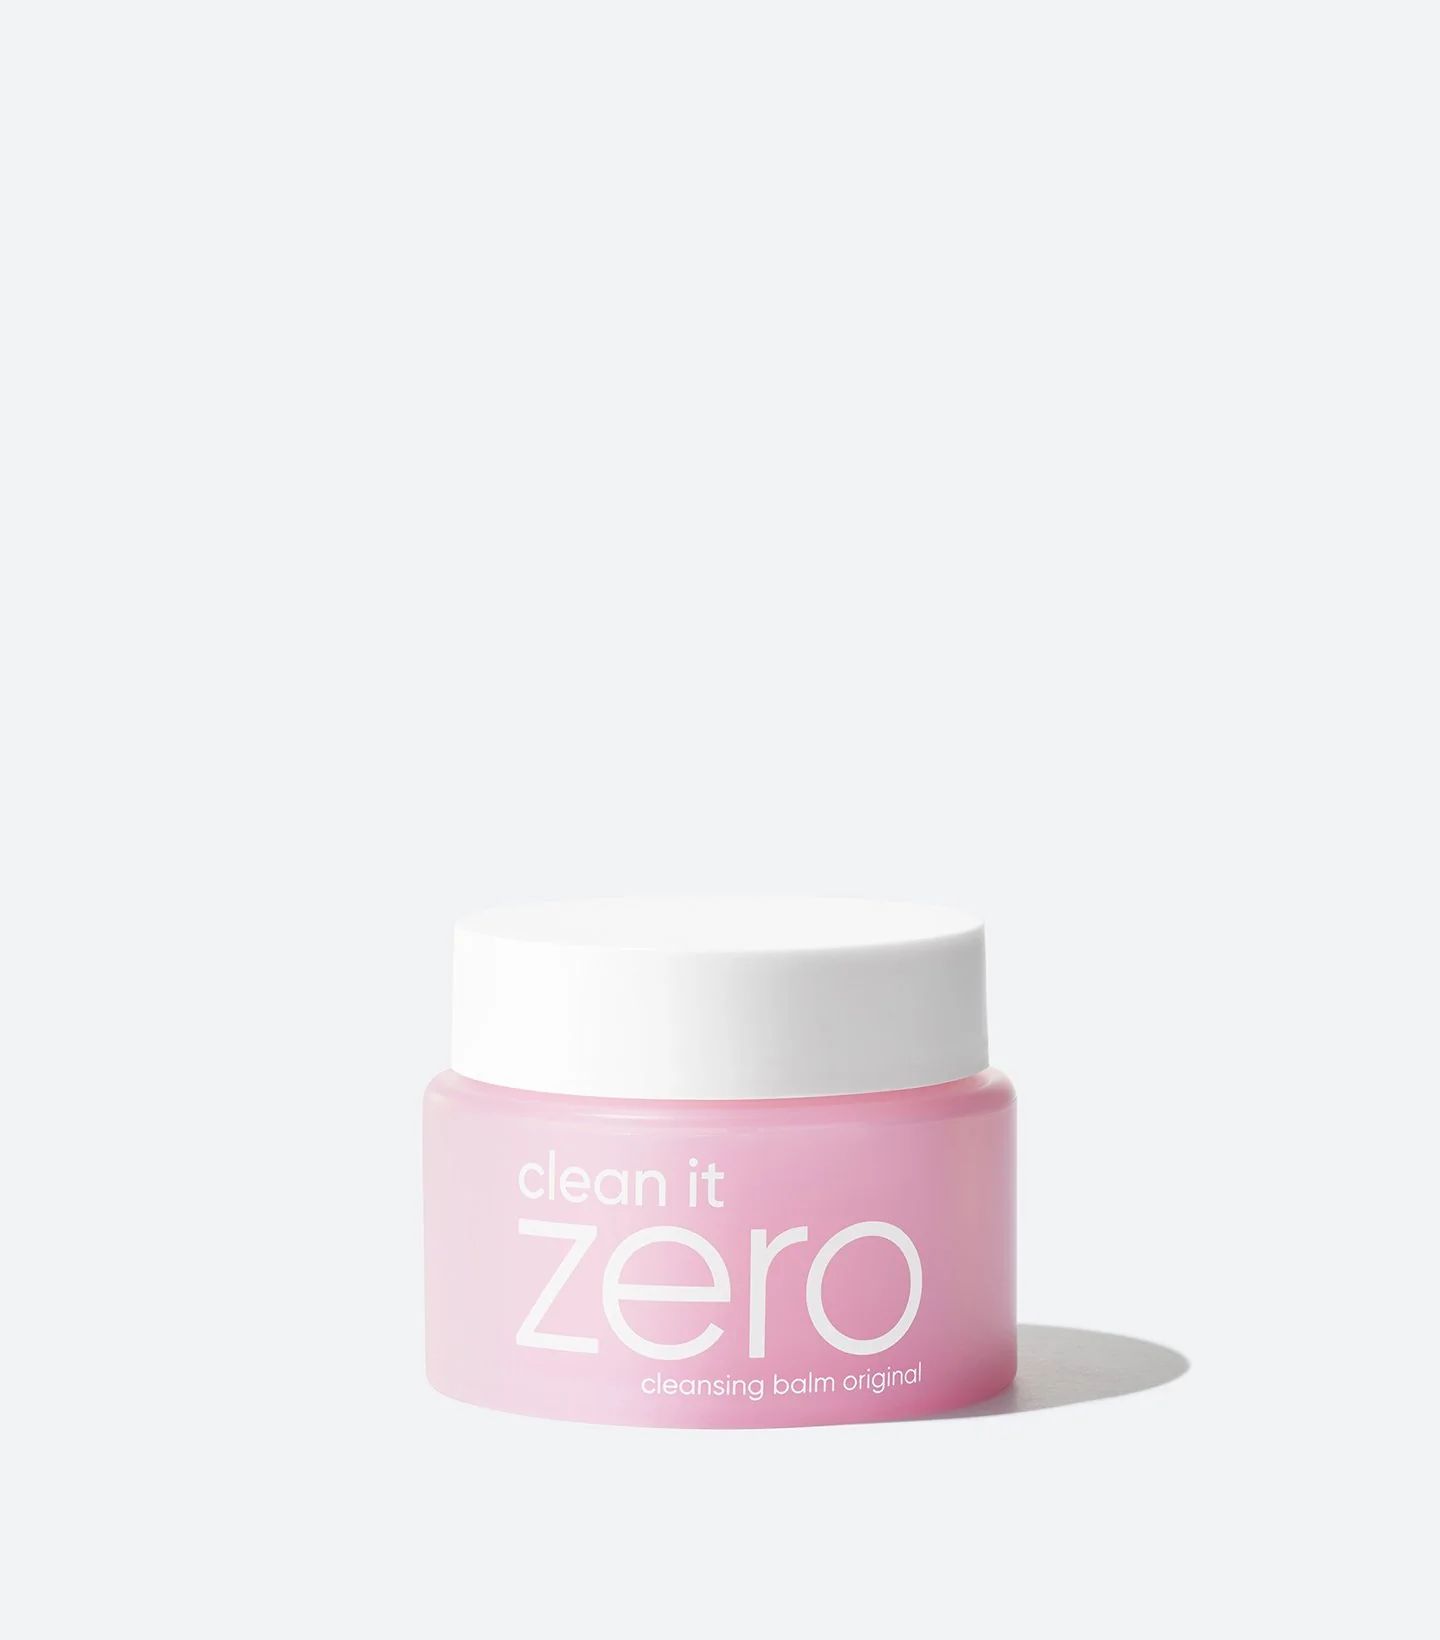 Clean It Zero Cleansing Balm | Peach and Lily, Inc.